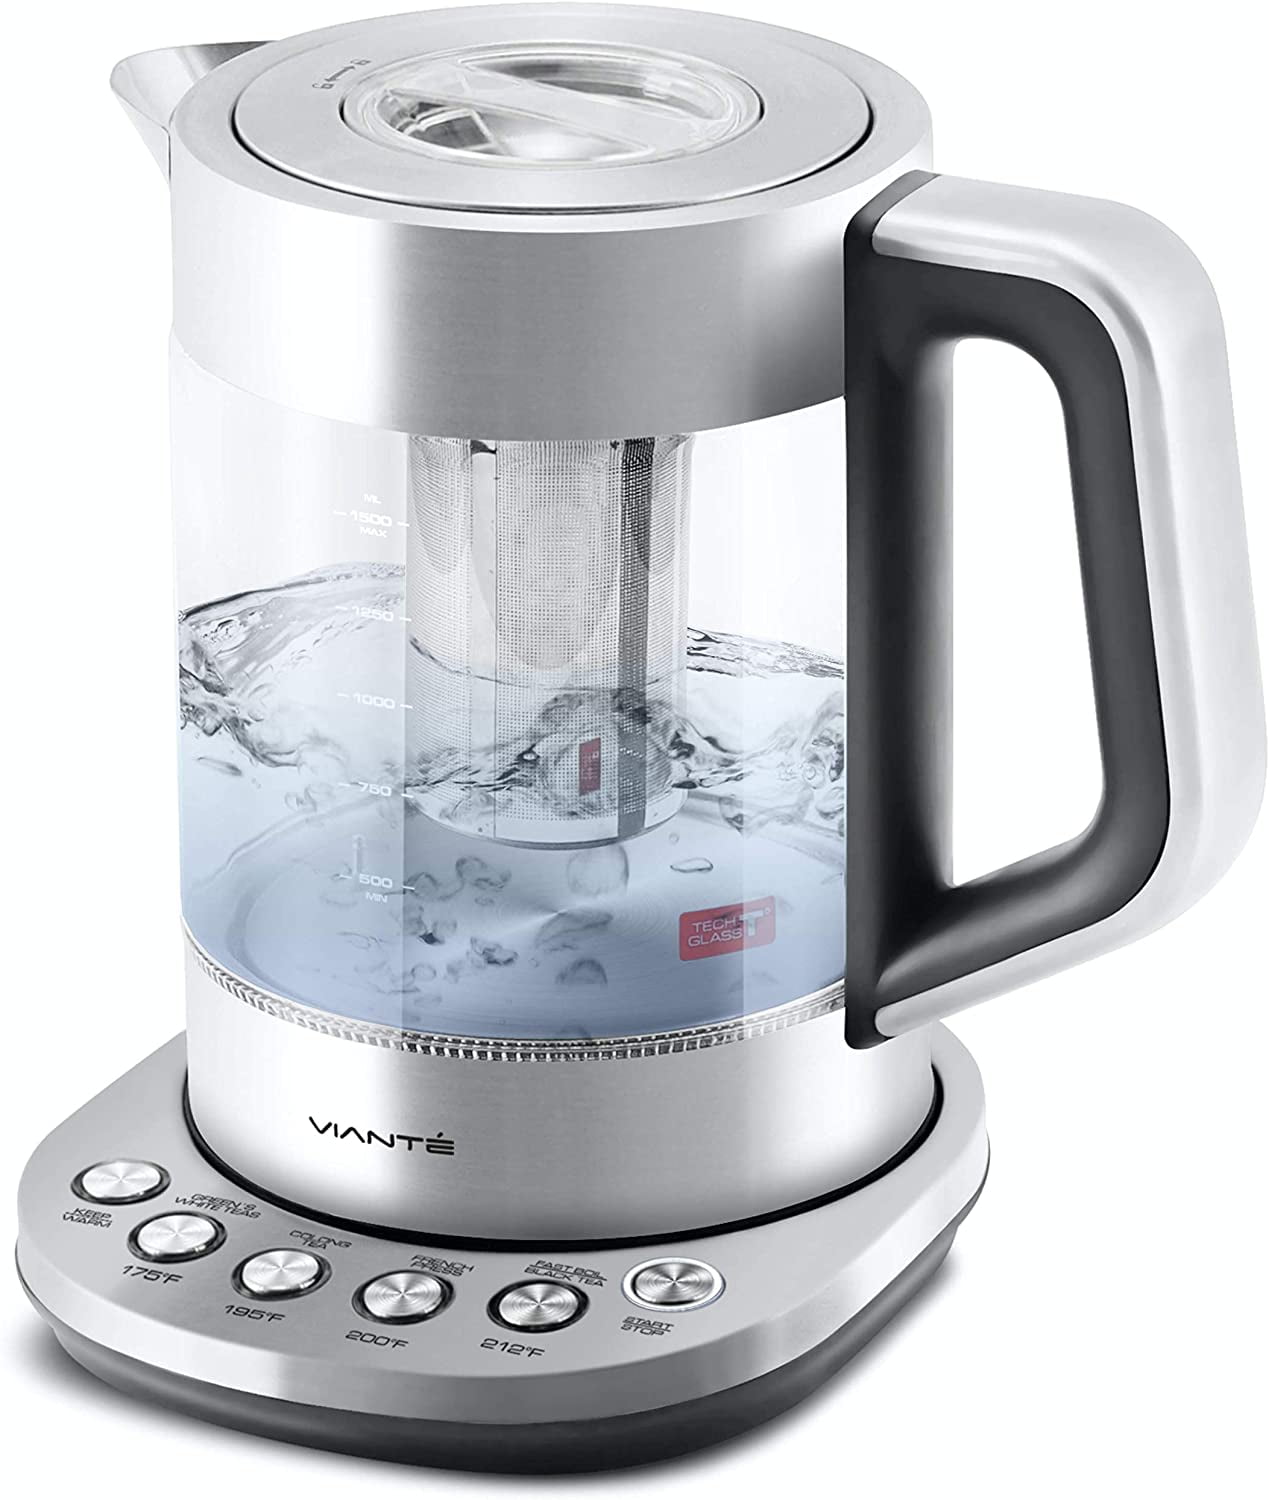 Vianté Hot Tea Maker Electric Glass Kettle with tea infuser and temperature  control. Automatic Shut off. Brewing Programs for your favorite teas and  Coffee.